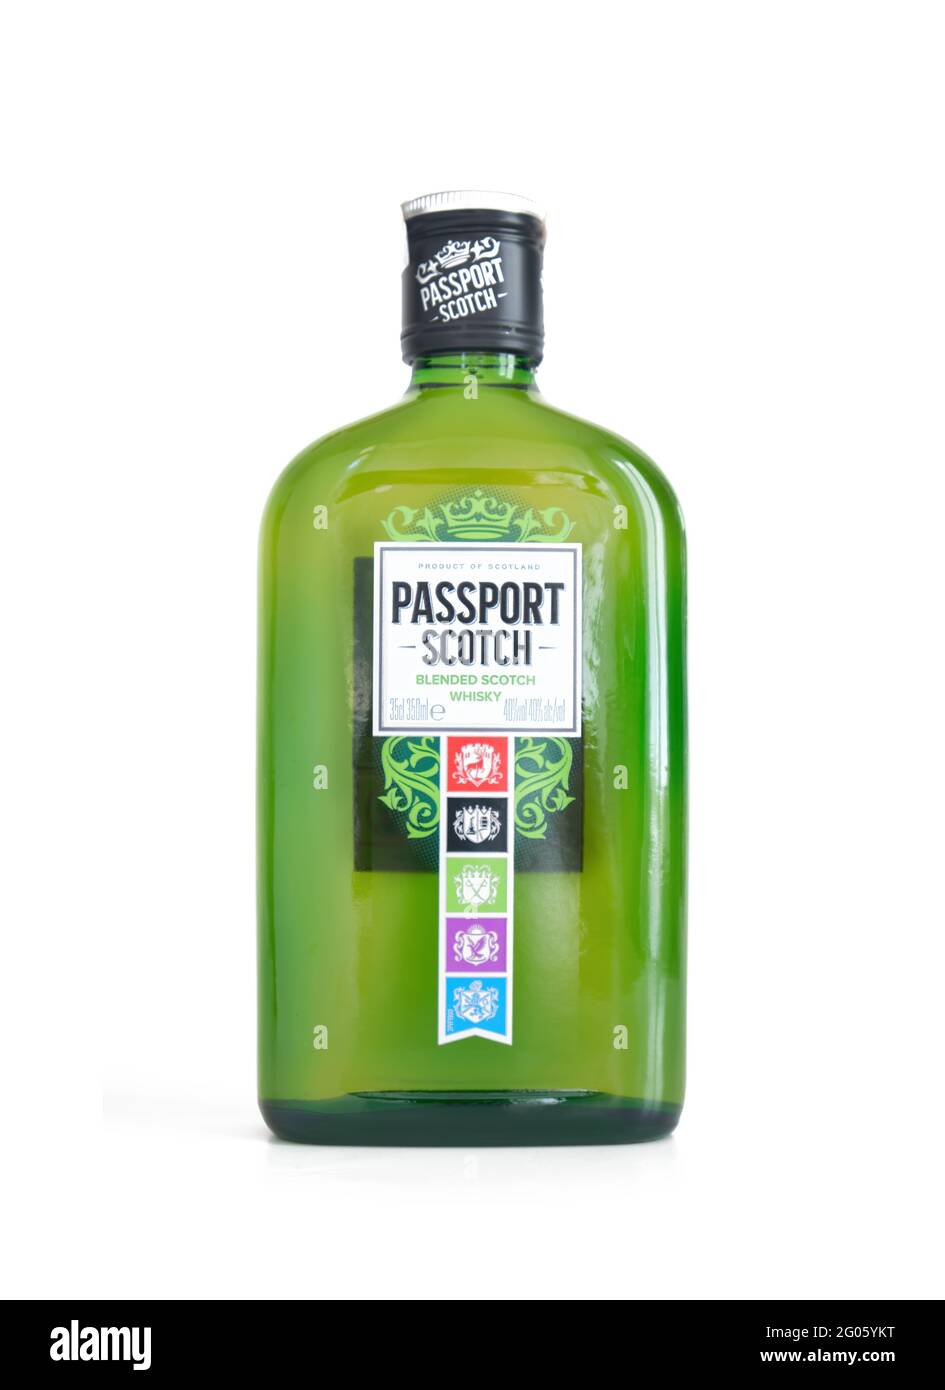 35cl bottle of Passport Scotch, a brand of whisky exported from Scotland by Seagram Distillers, PLC, and currently owned by Pernod Ricard. Stock Photo